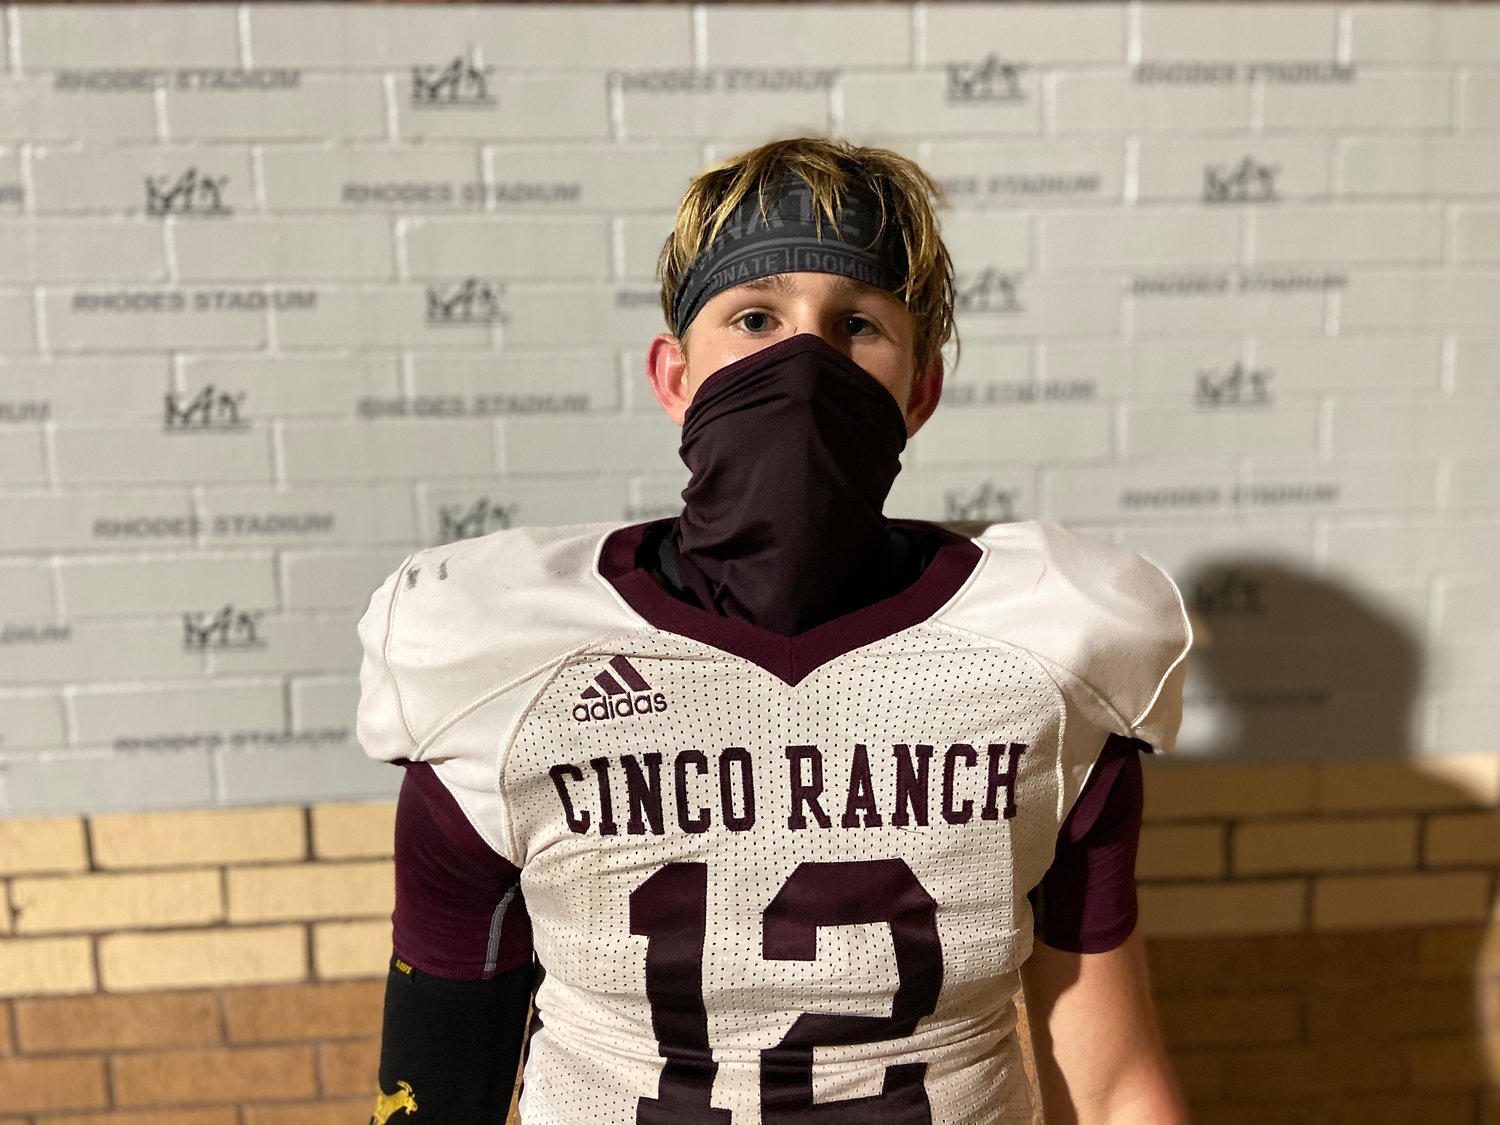 Cinco Ranch sophomore quarterback Gavin Rutherford threw for 200 yards and three touchdowns to help the Cougars snap a 14-game losing streak in beating Mayde Creek on Oct. 16 at Rhodes Stadium.